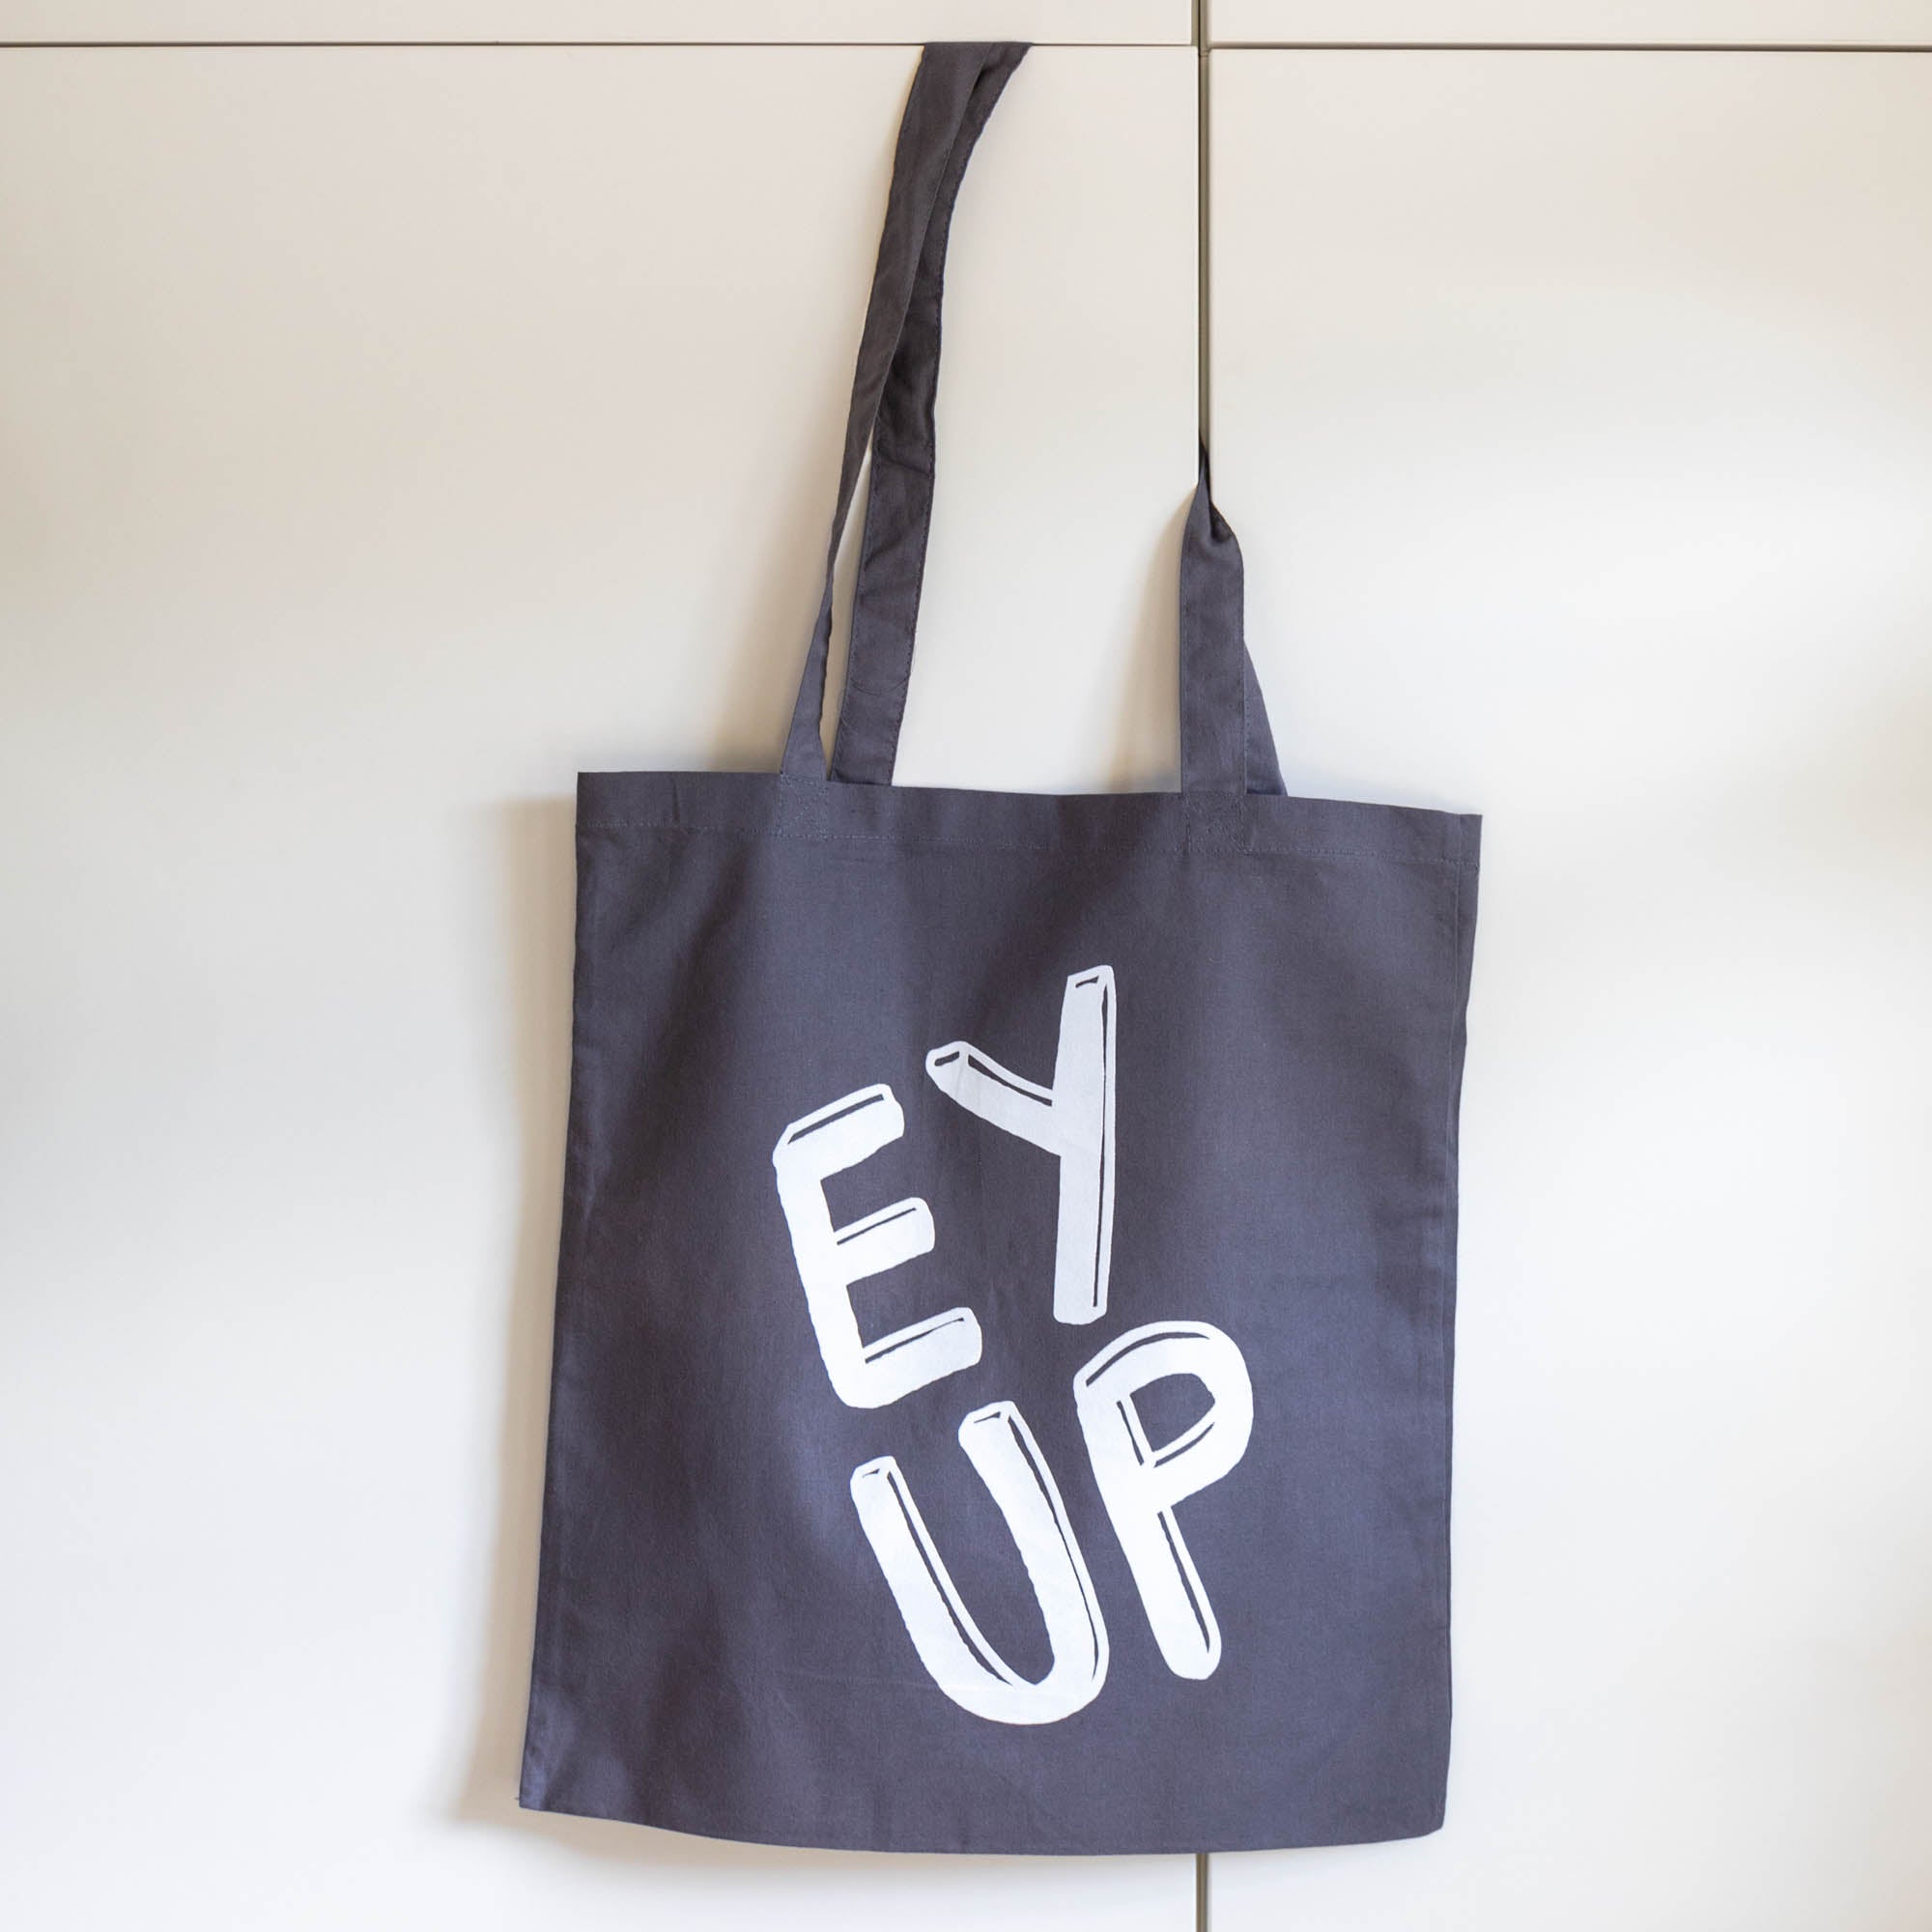 Ey Up Tote Bag - Finest Imaginary